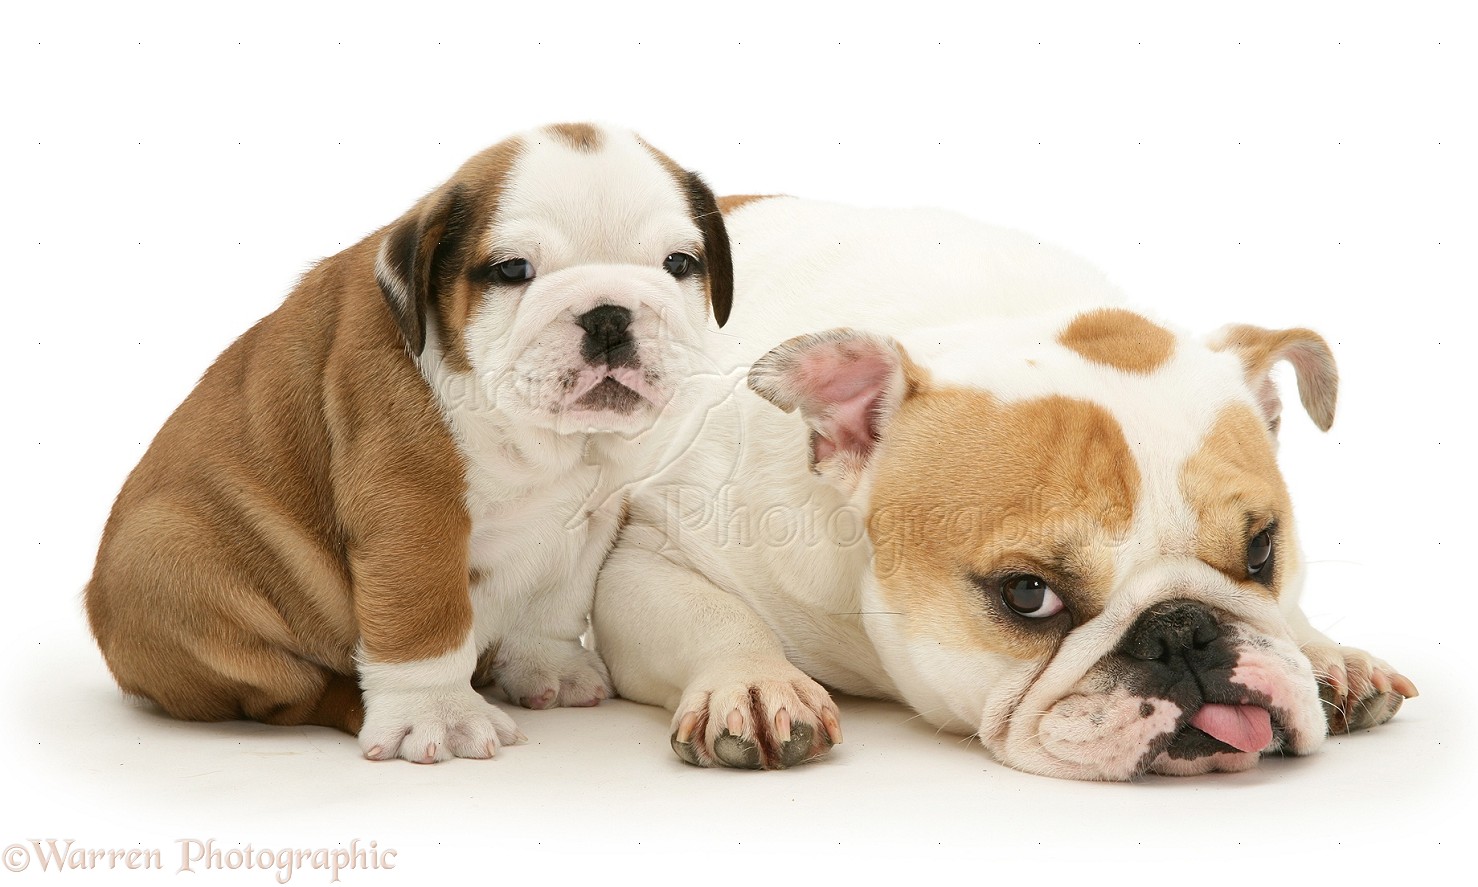 Bulldog pup and mother with tongue out photo WP13321